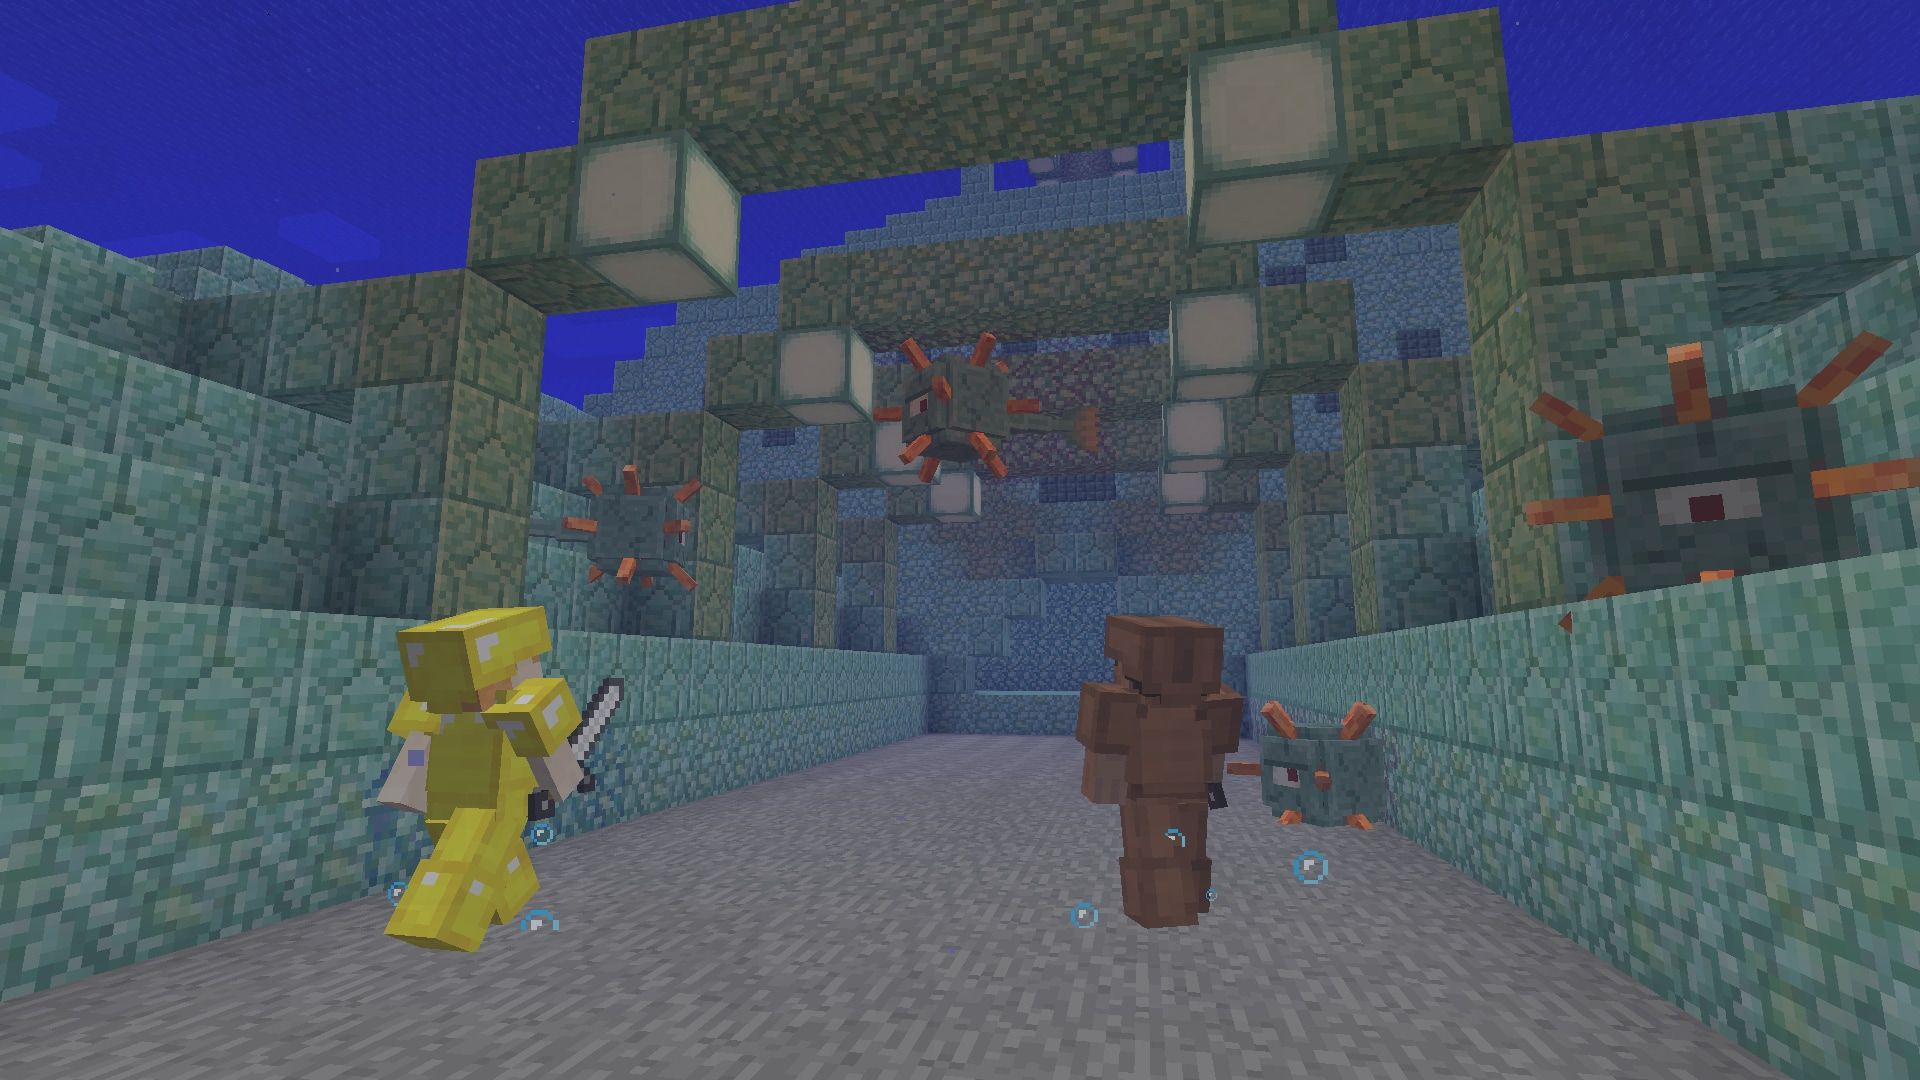 Thinking of returning to Minecraft? Here's what you need to know. Washington Post